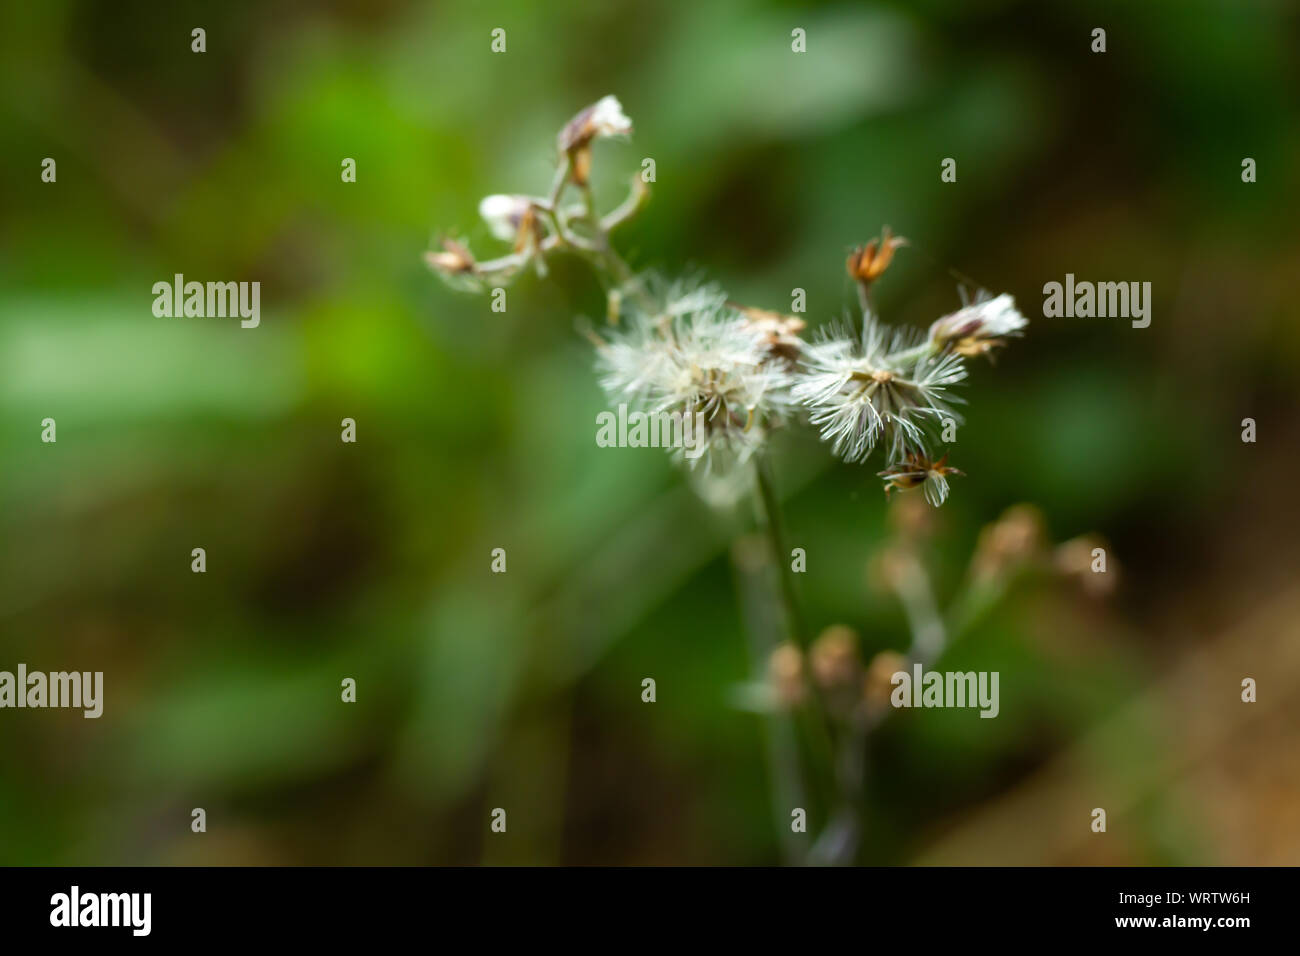 Ageratum conyzoides, Blurred little white flowers in bokeh garden background, Close up & Macro shot, Selective focus, Abstract graphic design Stock Photo